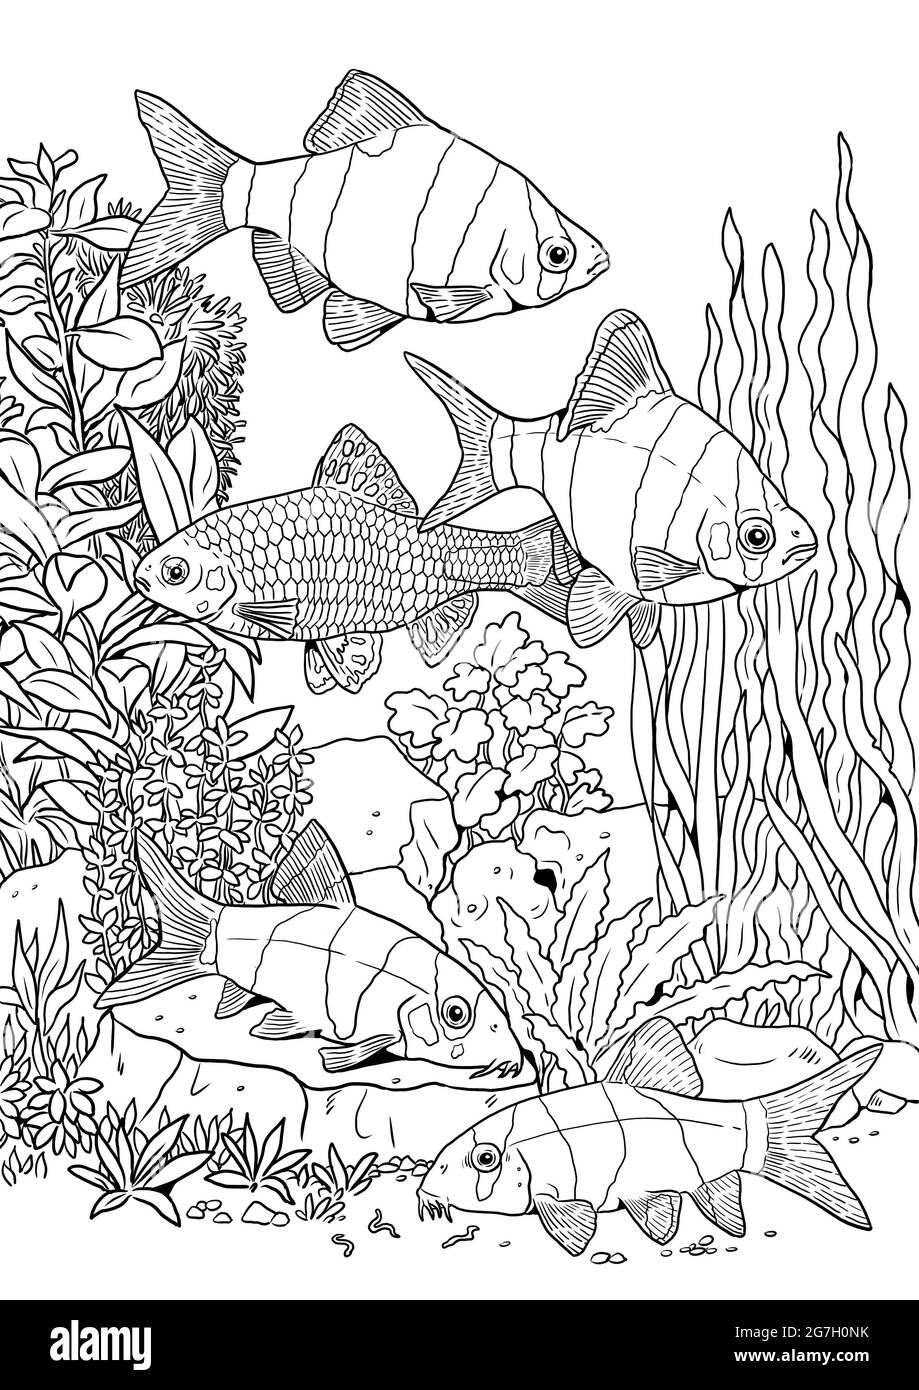 Sumatra barb and tiger botia for coloring. Colorful tropical fish templates. Coloring book for children and adults. Stock Photo